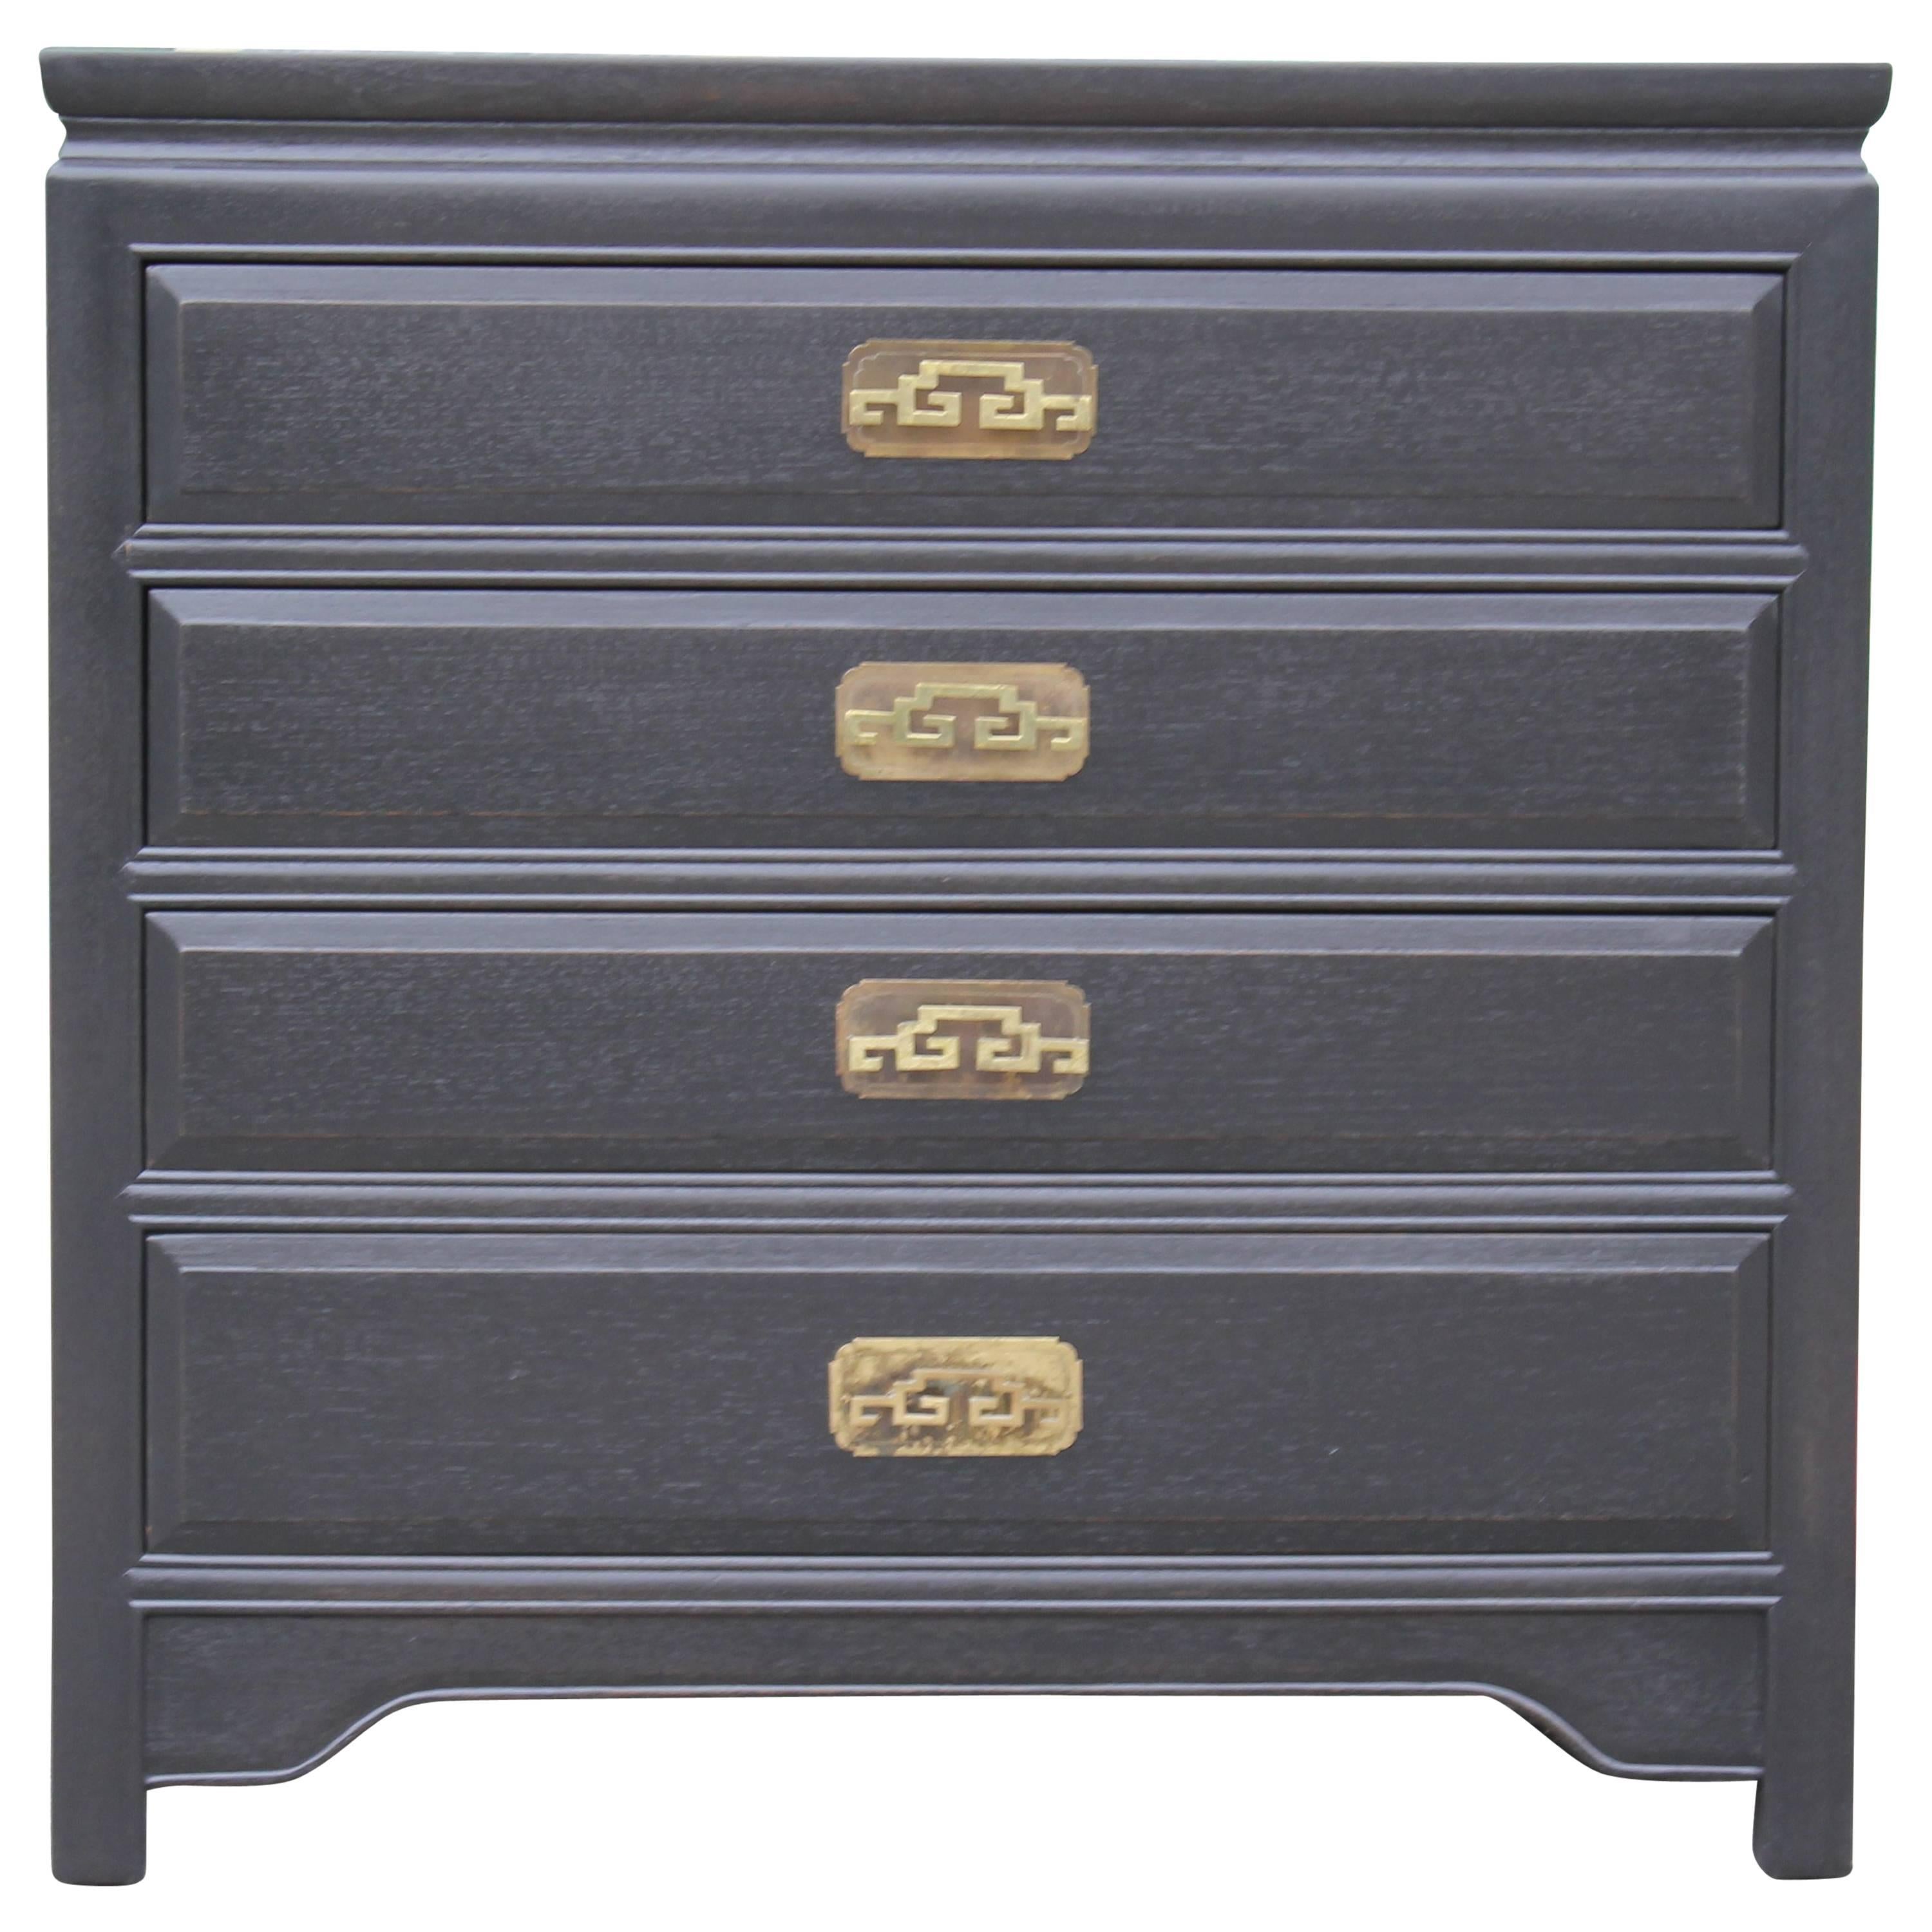 Pair of black mismatched Chests with brass Hardware by Chow's Oriental Furniture Co. in Houston, TX. These have been expertly lacquered in a nice black that contrasts the brass hardware beautifully. The chest with cabinet doors opens to reveal a